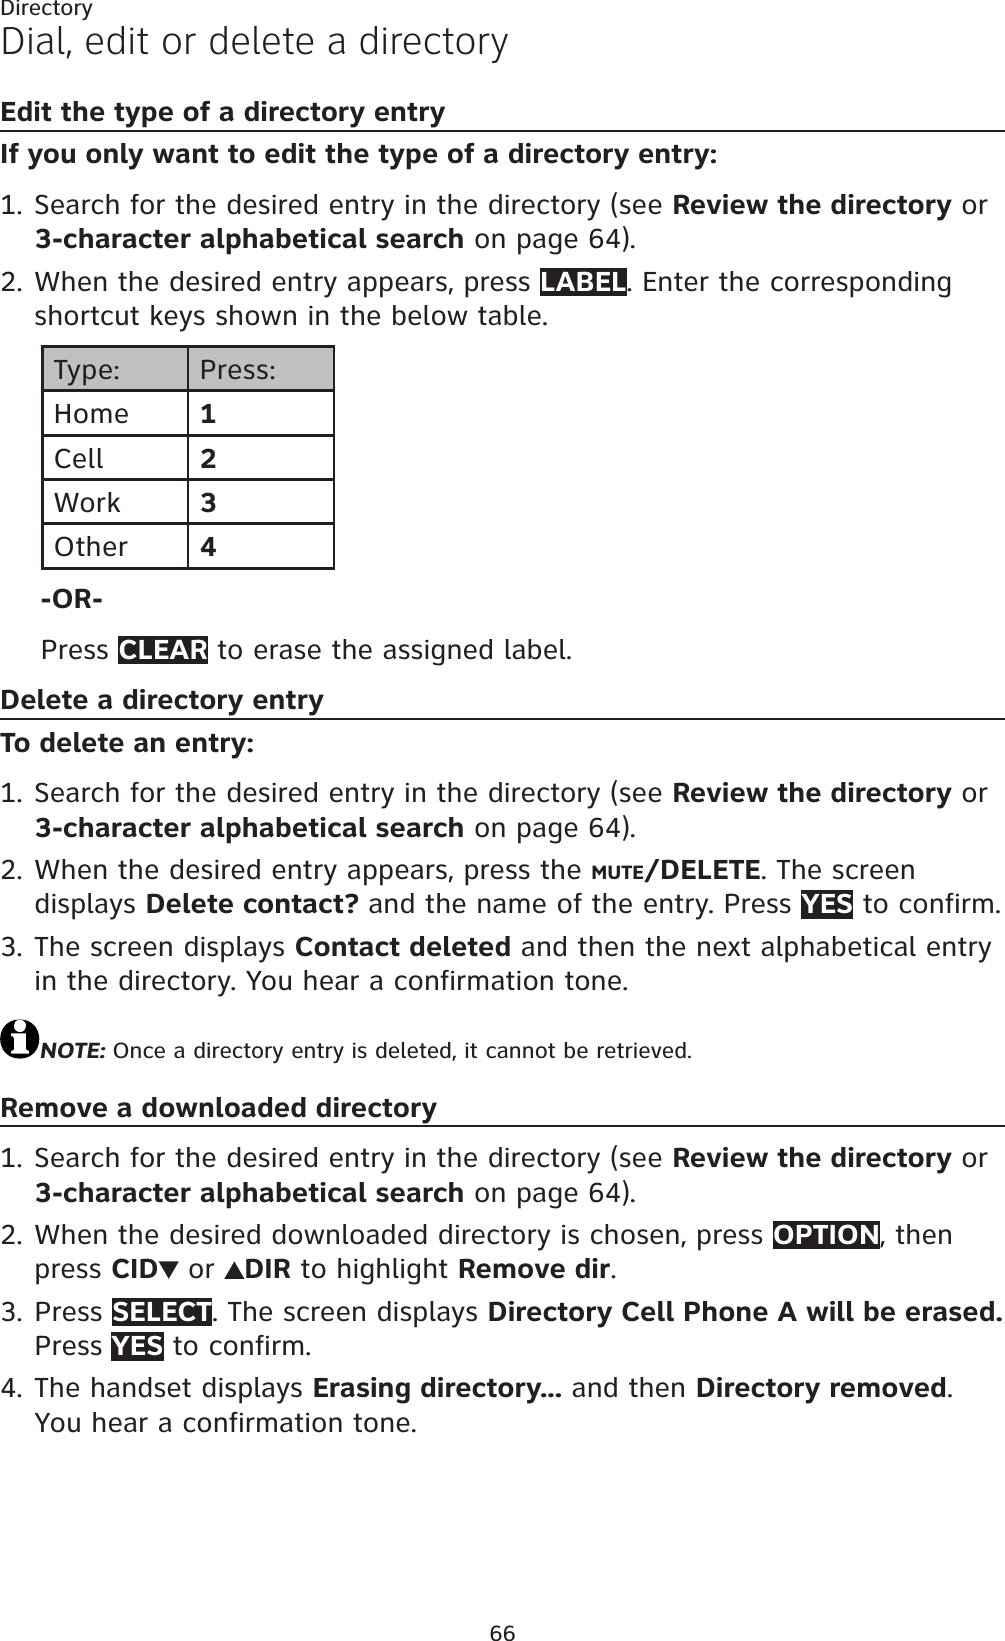 66DirectoryDial, edit or delete a directoryEdit the type of a directory entryIf you only want to edit the type of a directory entry:Search for the desired entry in the directory (see Review the directory or 3-character alphabetical search on page 64).When the desired entry appears, press LABEL. Enter the corresponding shortcut keys shown in the below table.Type: Press:Home 1Cell 2Work 3Other 4-OR-Press CLEAR to erase the assigned label.Delete a directory entryTo delete an entry:Search for the desired entry in the directory (see Review the directory or 3-character alphabetical search on page 64).When the desired entry appears, press the MUTE/DELETE. The screen displays Delete contact? and the name of the entry. Press YES to confirm. The screen displays Contact deleted and then the next alphabetical entry in the directory. You hear a confirmation tone.NOTE: Once a directory entry is deleted, it cannot be retrieved.Remove a downloaded directorySearch for the desired entry in the directory (see Review the directory or 3-character alphabetical search on page 64).When the desired downloaded directory is chosen, press OPTION, then press CID  or  DIR to highlight Remove dir.Press SELECT. The screen displays Directory Cell Phone A will be erased. Press YES to confirm.The handset displays Erasing directory... and then Directory removed.You hear a confirmation tone.1.2.1.2.3.1.2.3.4.